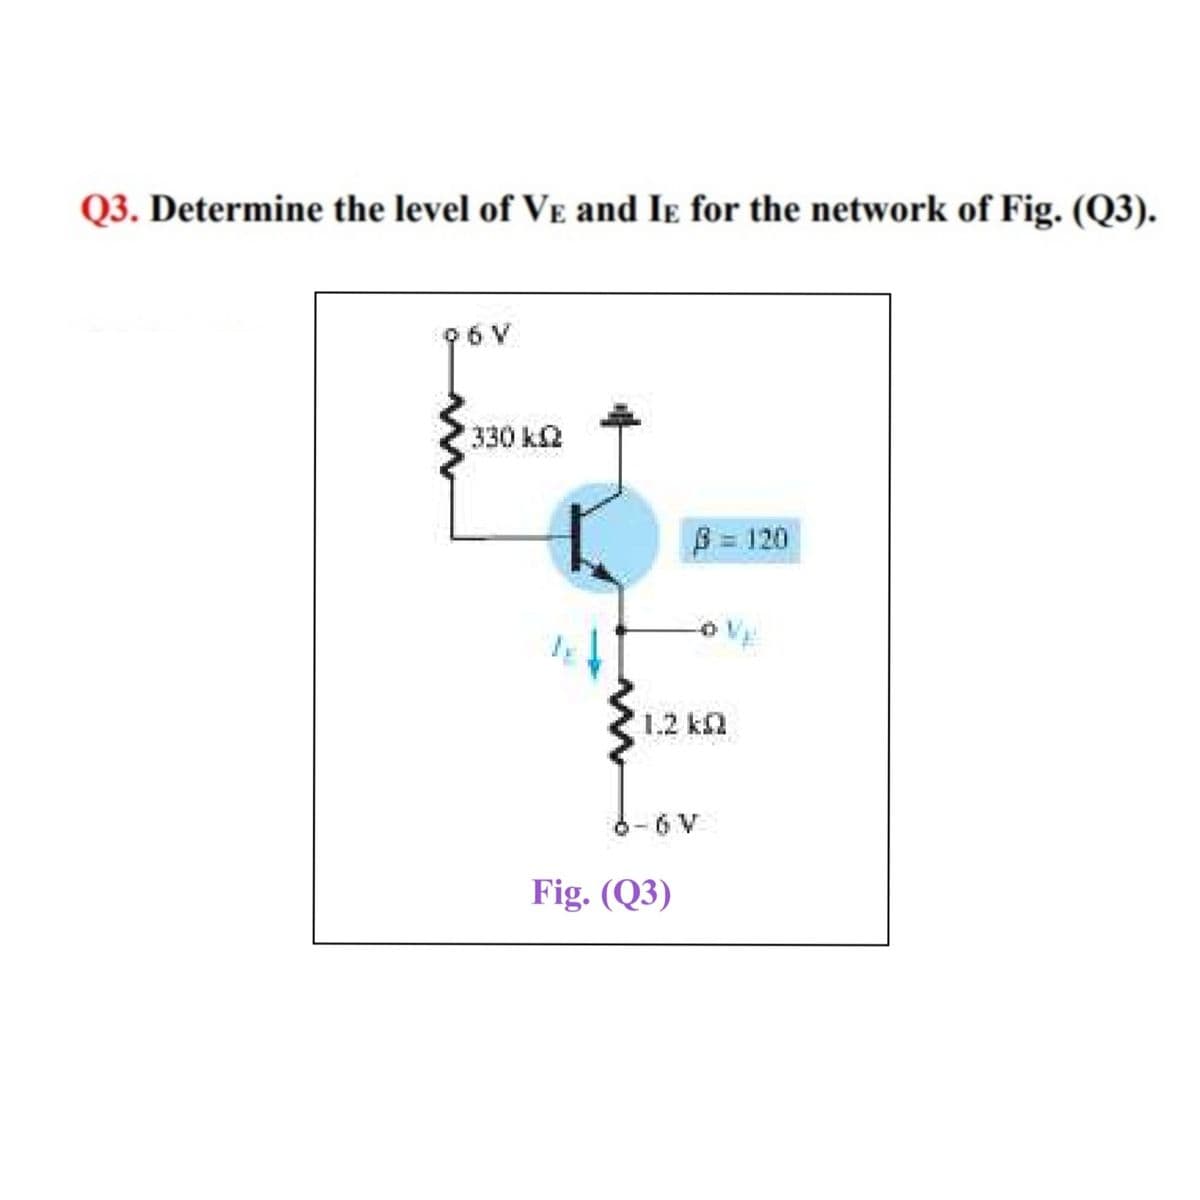 Q3. Determine the level of VE and Ie for the network of Fig. (Q3).
96 V
330 k2
B 120
1.2 k2
6-6 V
Fig. (Q3)
